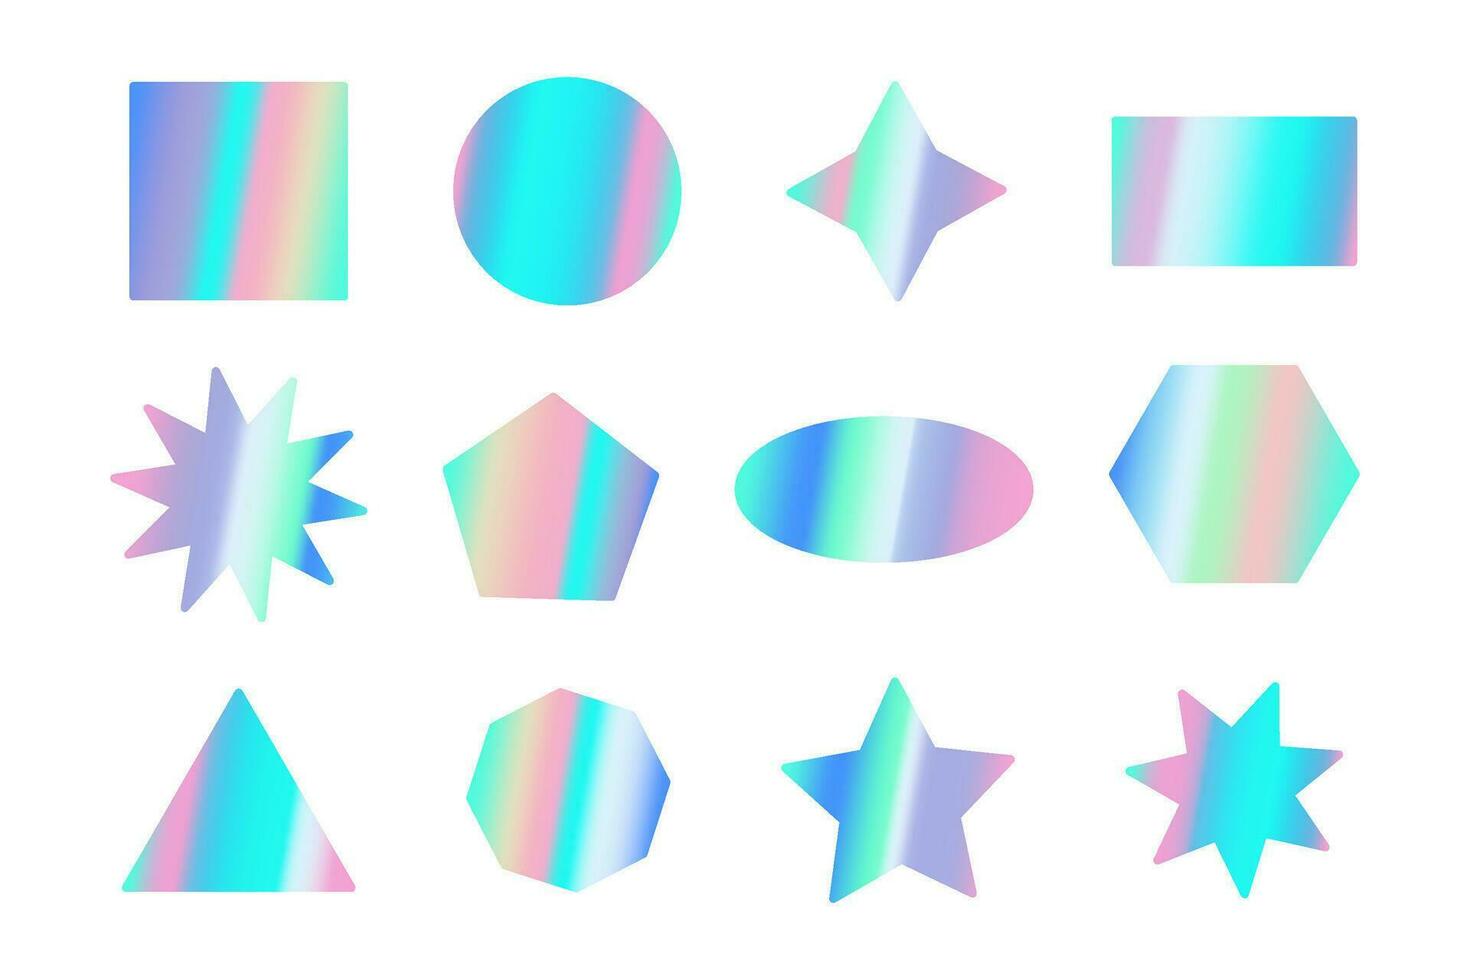 A set of 10 holographic stickers Y2K in different shapes - circle, square, star, oval and others. Rainbow gradient patch isolated on white background. Trendy vector elements in trendy 90s, 00s style.